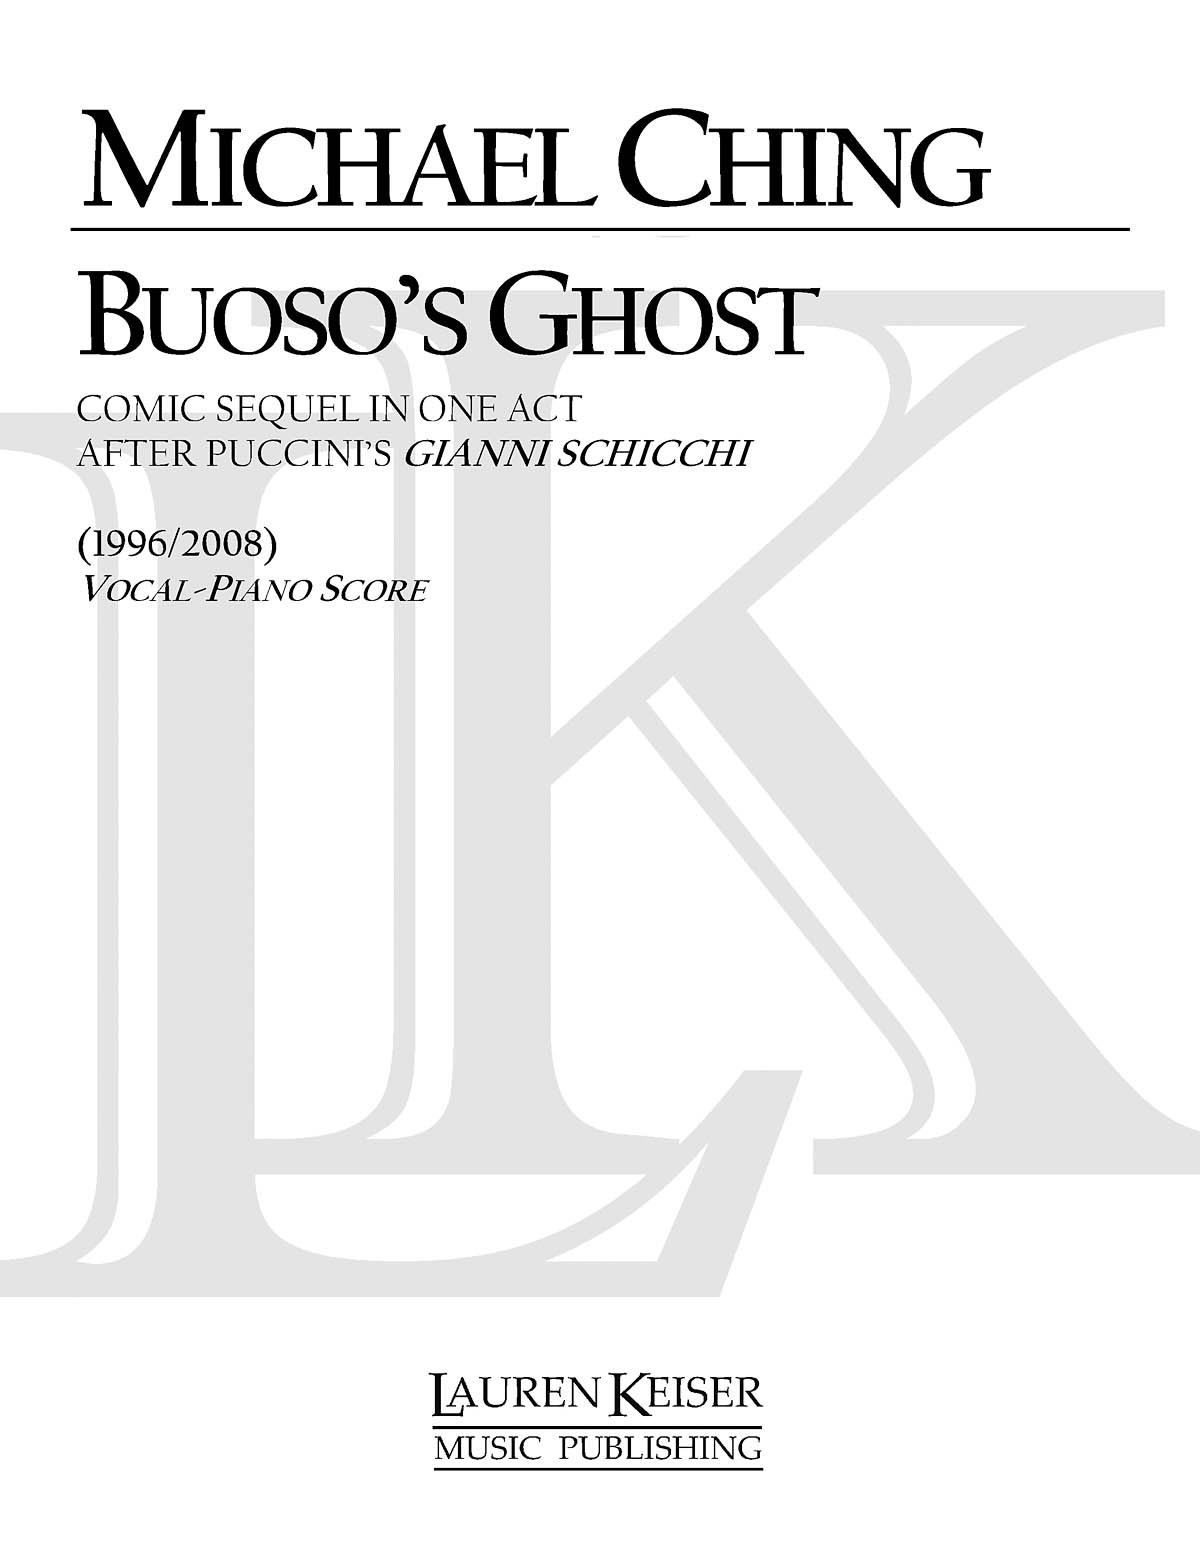 Buoso's Ghost: Comic Sequel in One Act(After Puccini's Gianni Schicchi)